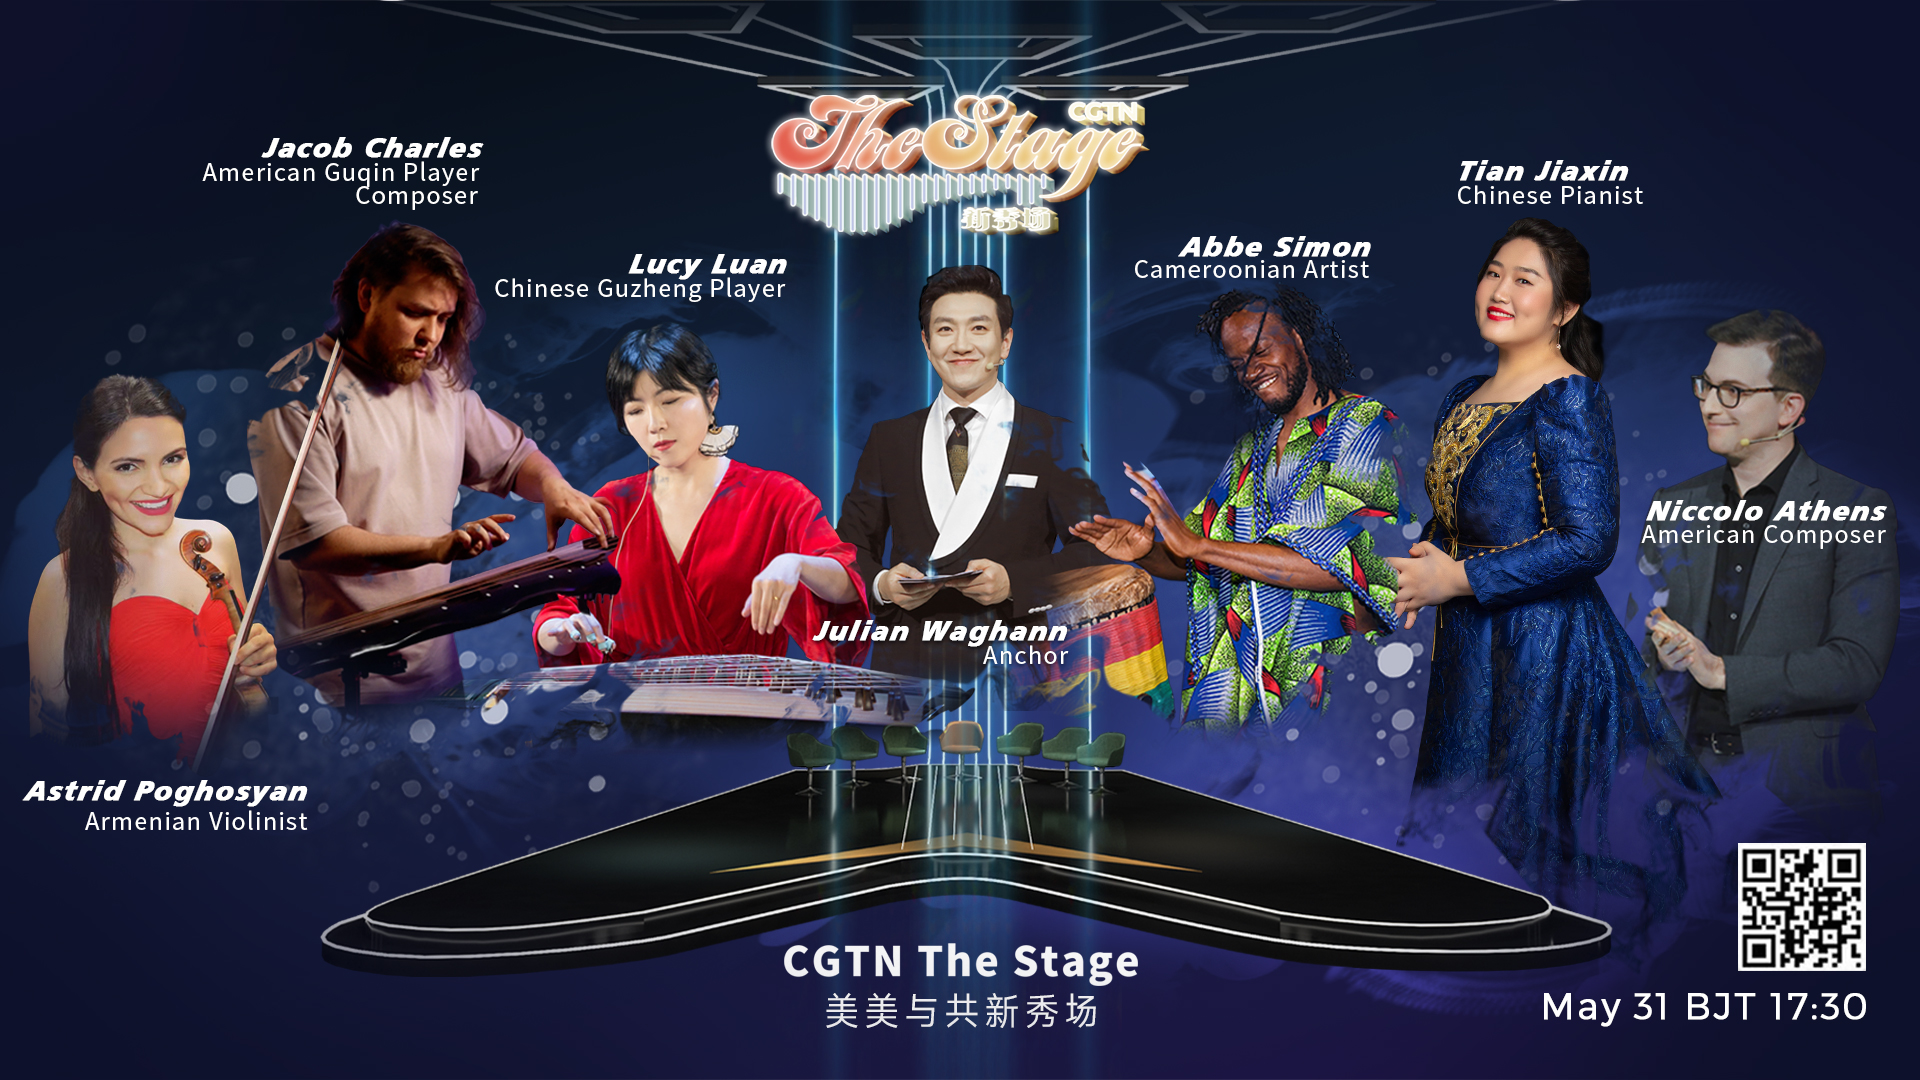 CGTN The Stage will air today